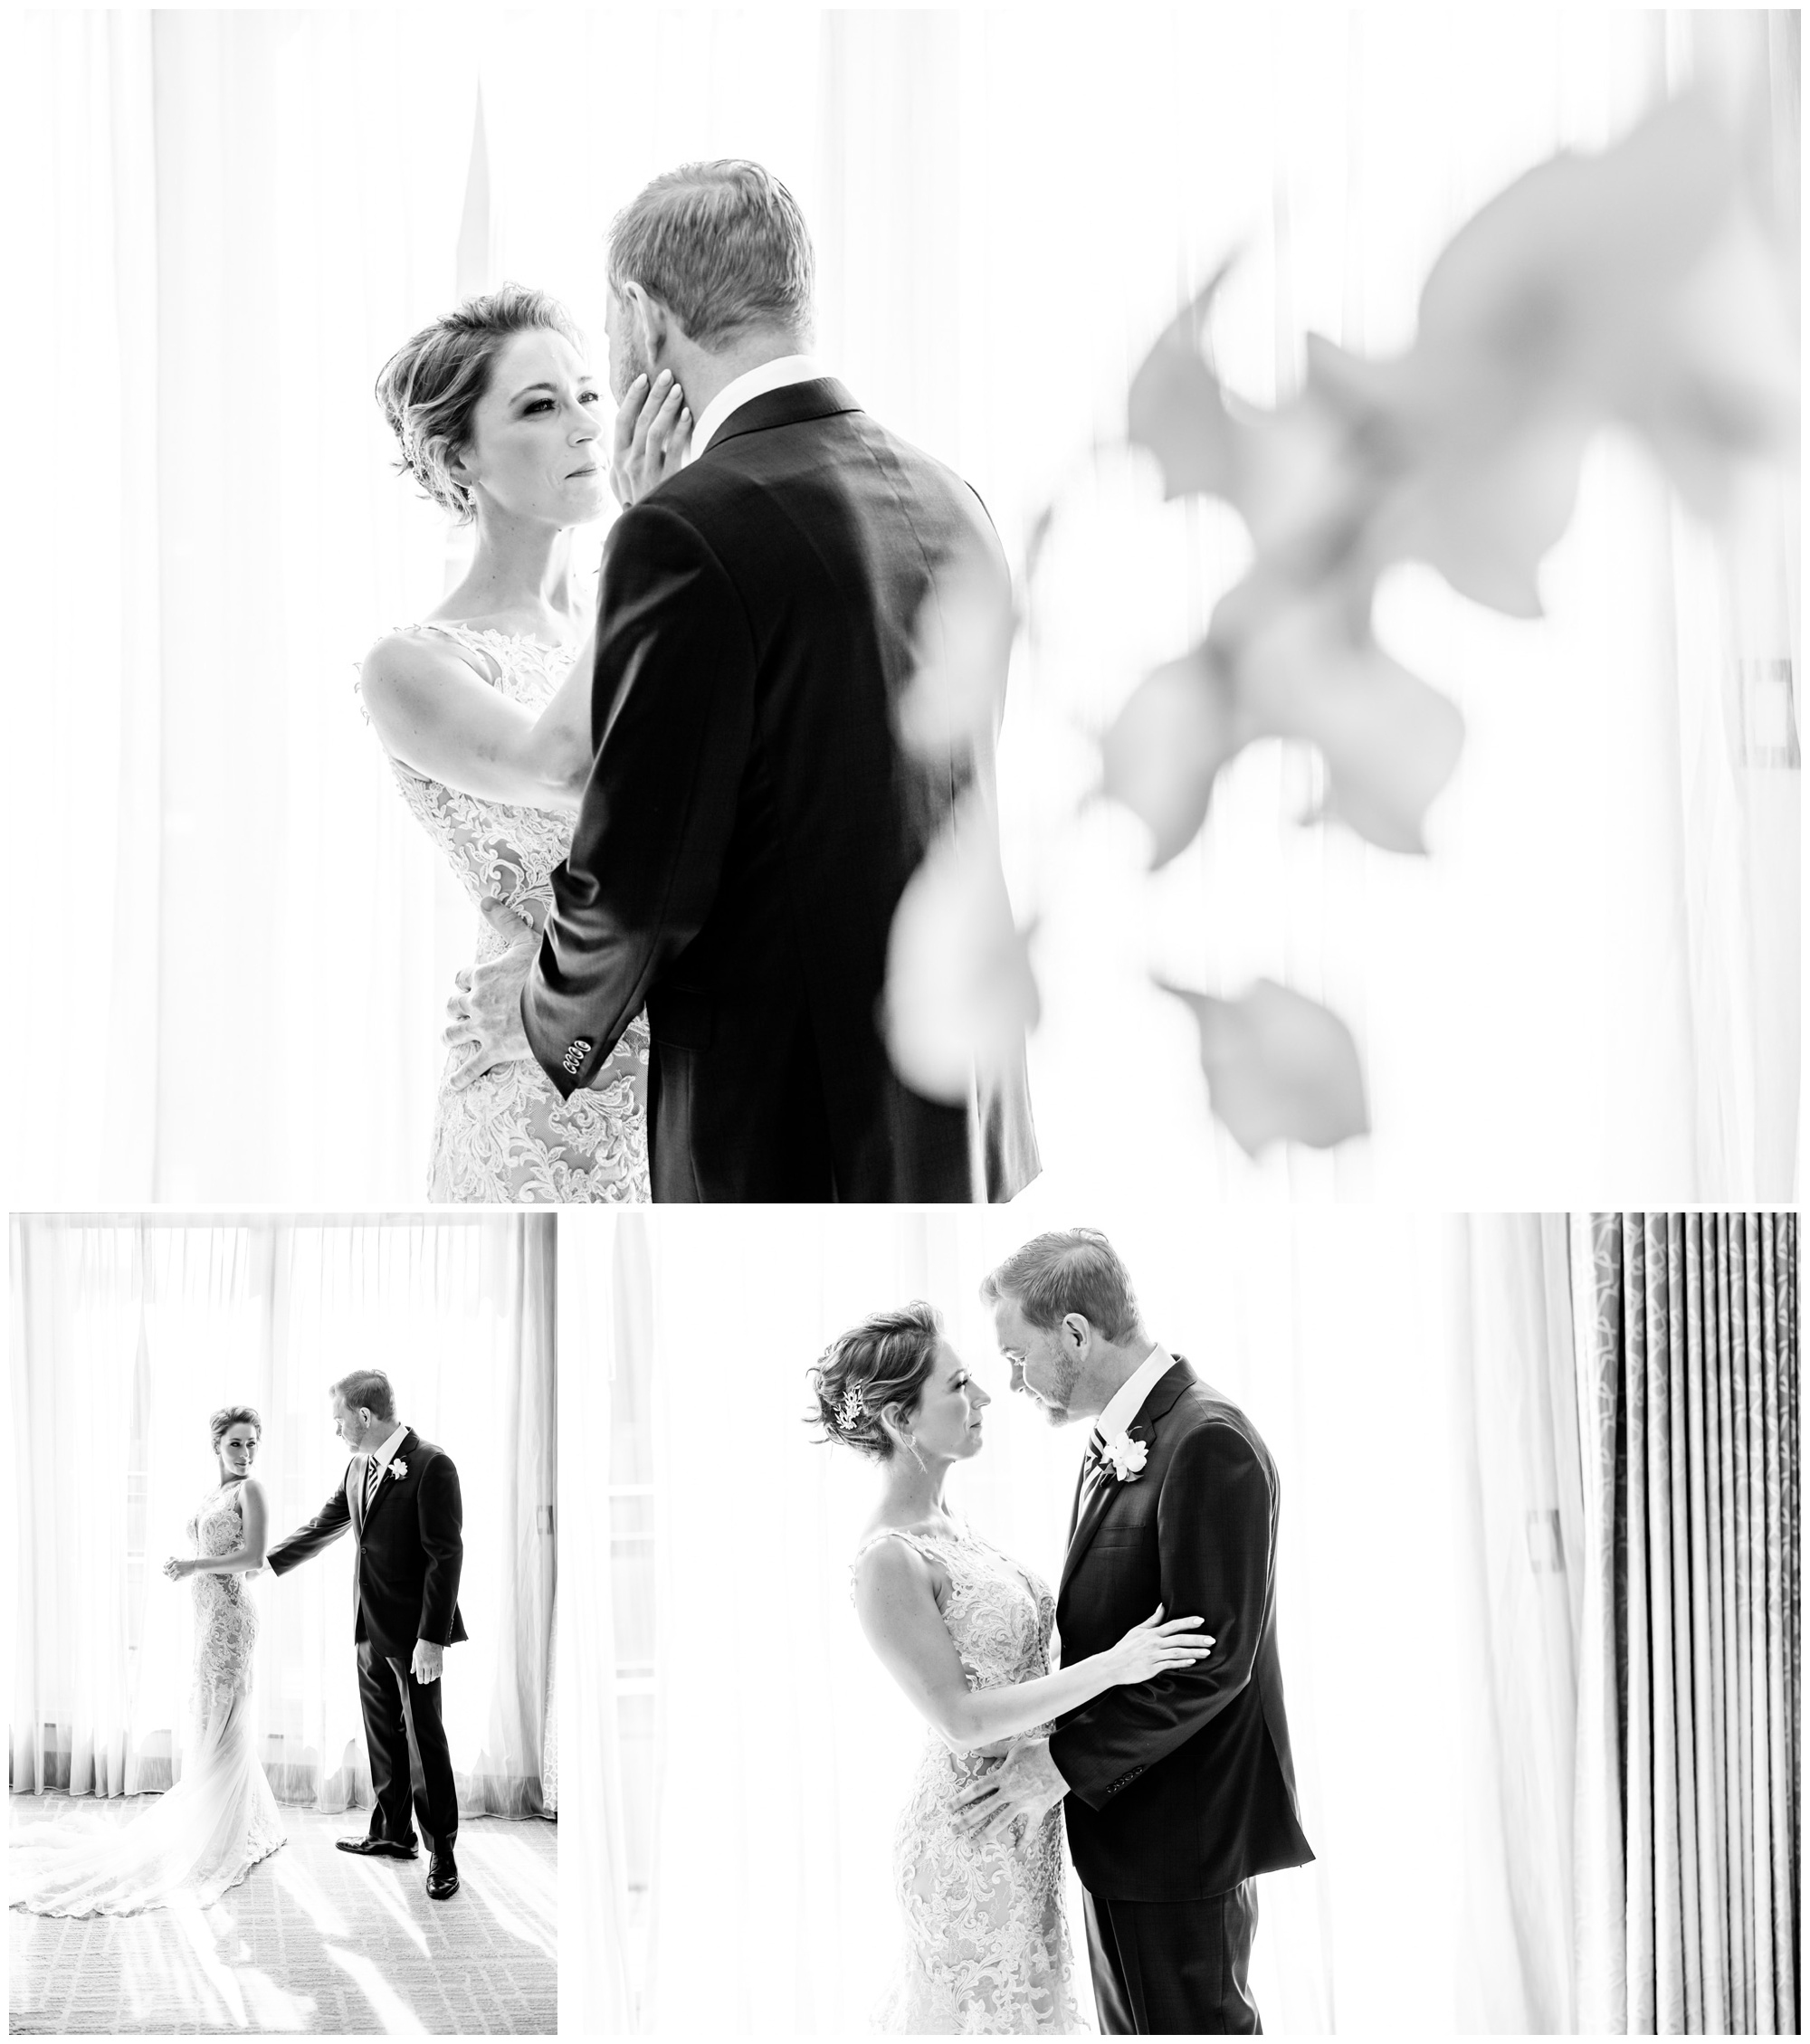 romantic Ritz Carlton Georgetown wedding, summer wedding aesthetic, green and white aesthetic, summer D.C. wedding, D.C. wedding venues, Ritz Carlton wedding, Washington D.C. wedding, romantic wedding aesthetic, Georgetown wedding, Rachel E.H. Photography, D.C. photographer, bride and groom first look, black and white, couple hugging, bride holding grooms face